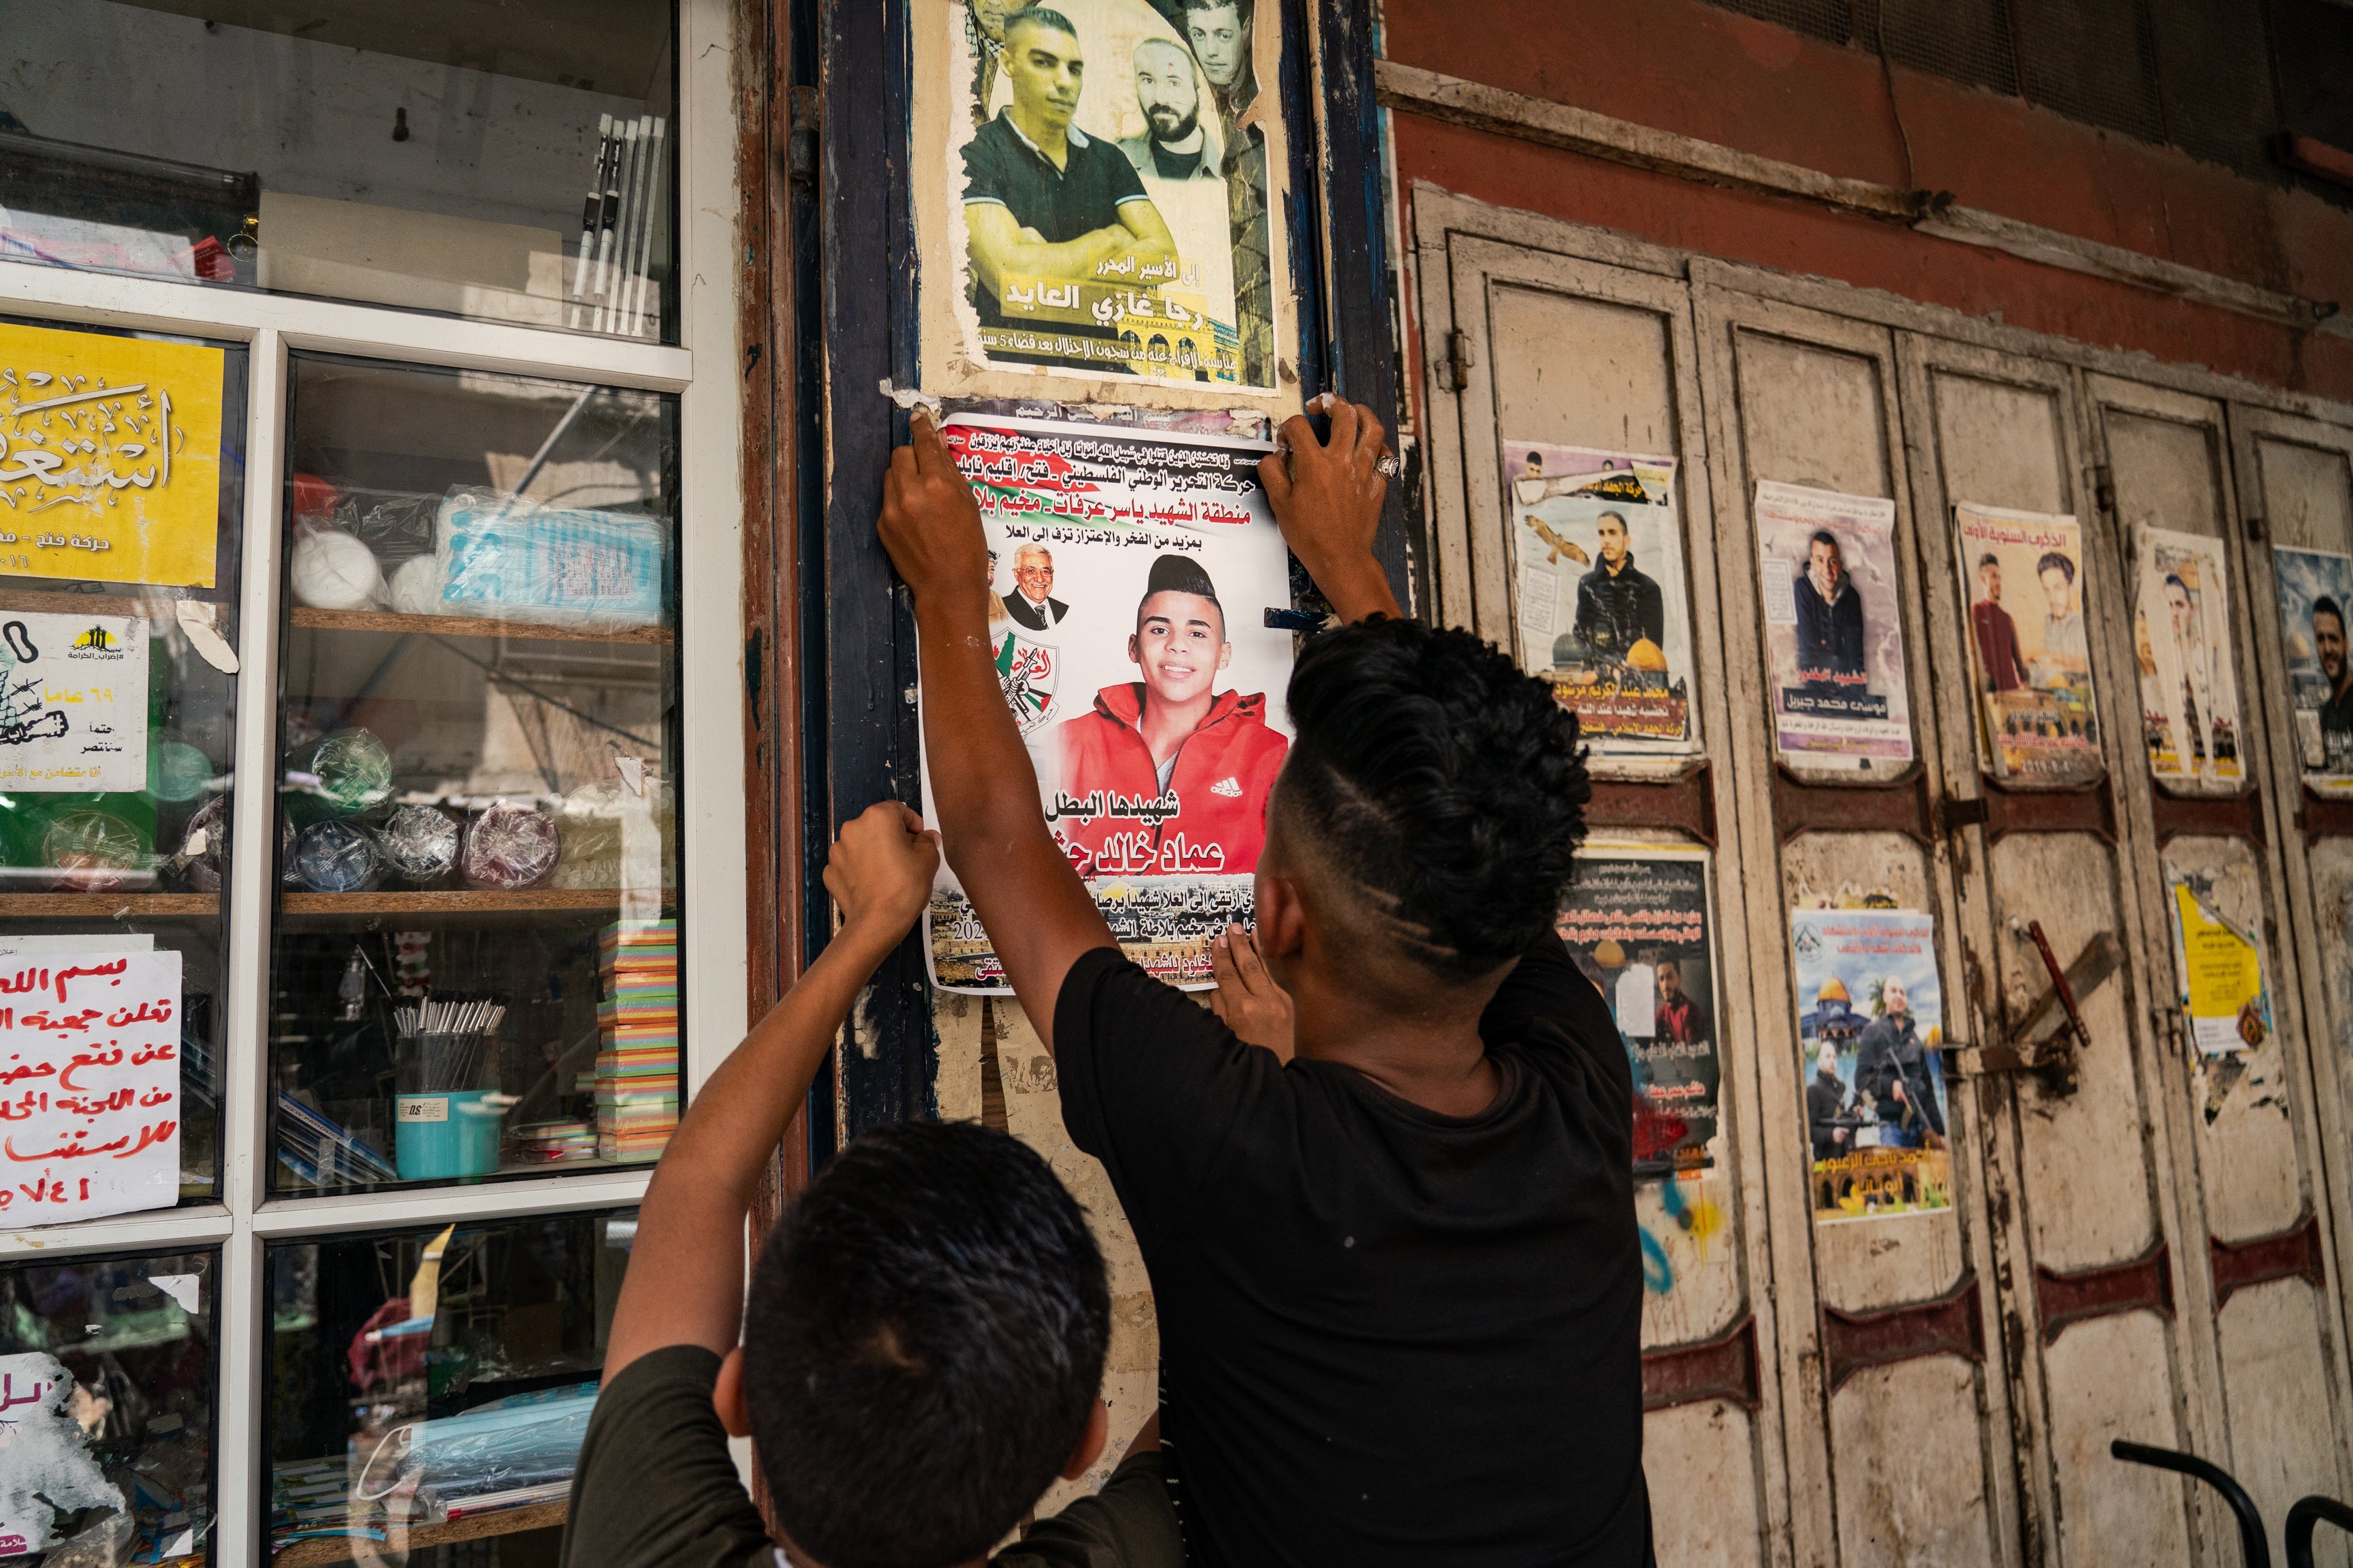 Palestinian children in the West Bank city of Nablus hang a poster of a teenager shot dead during an Israeli raid